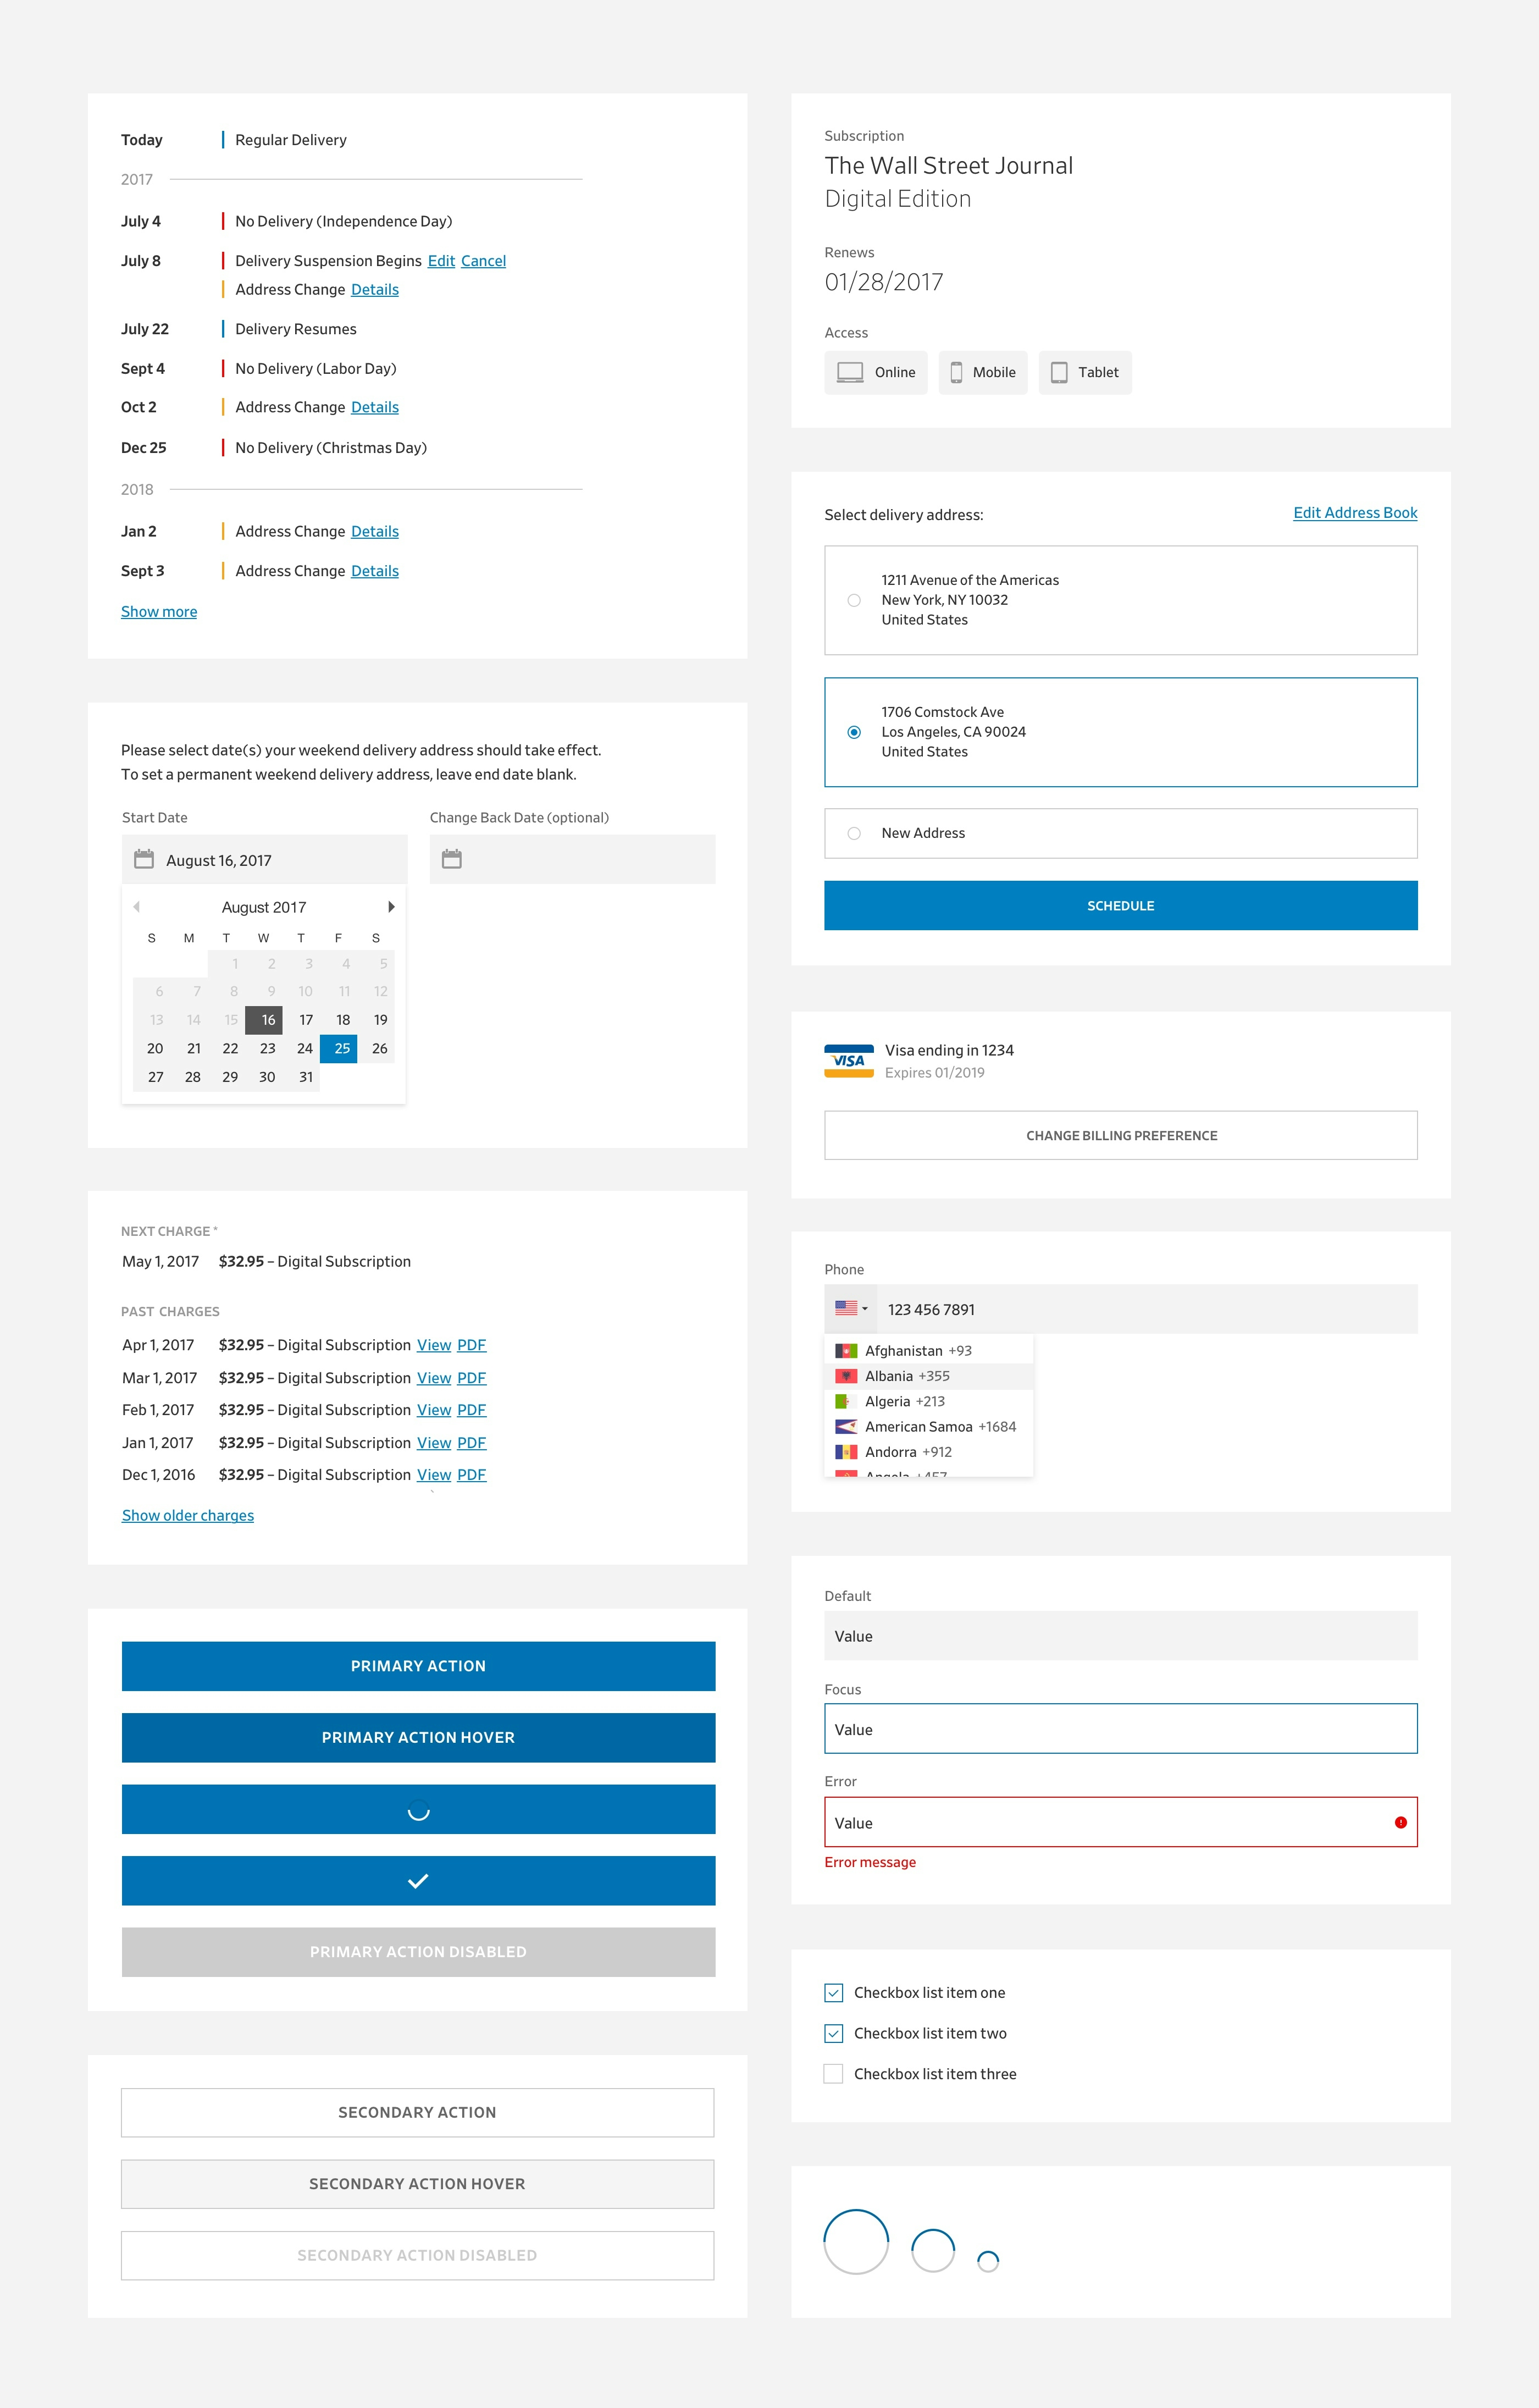 WSJ UI kit and form library.